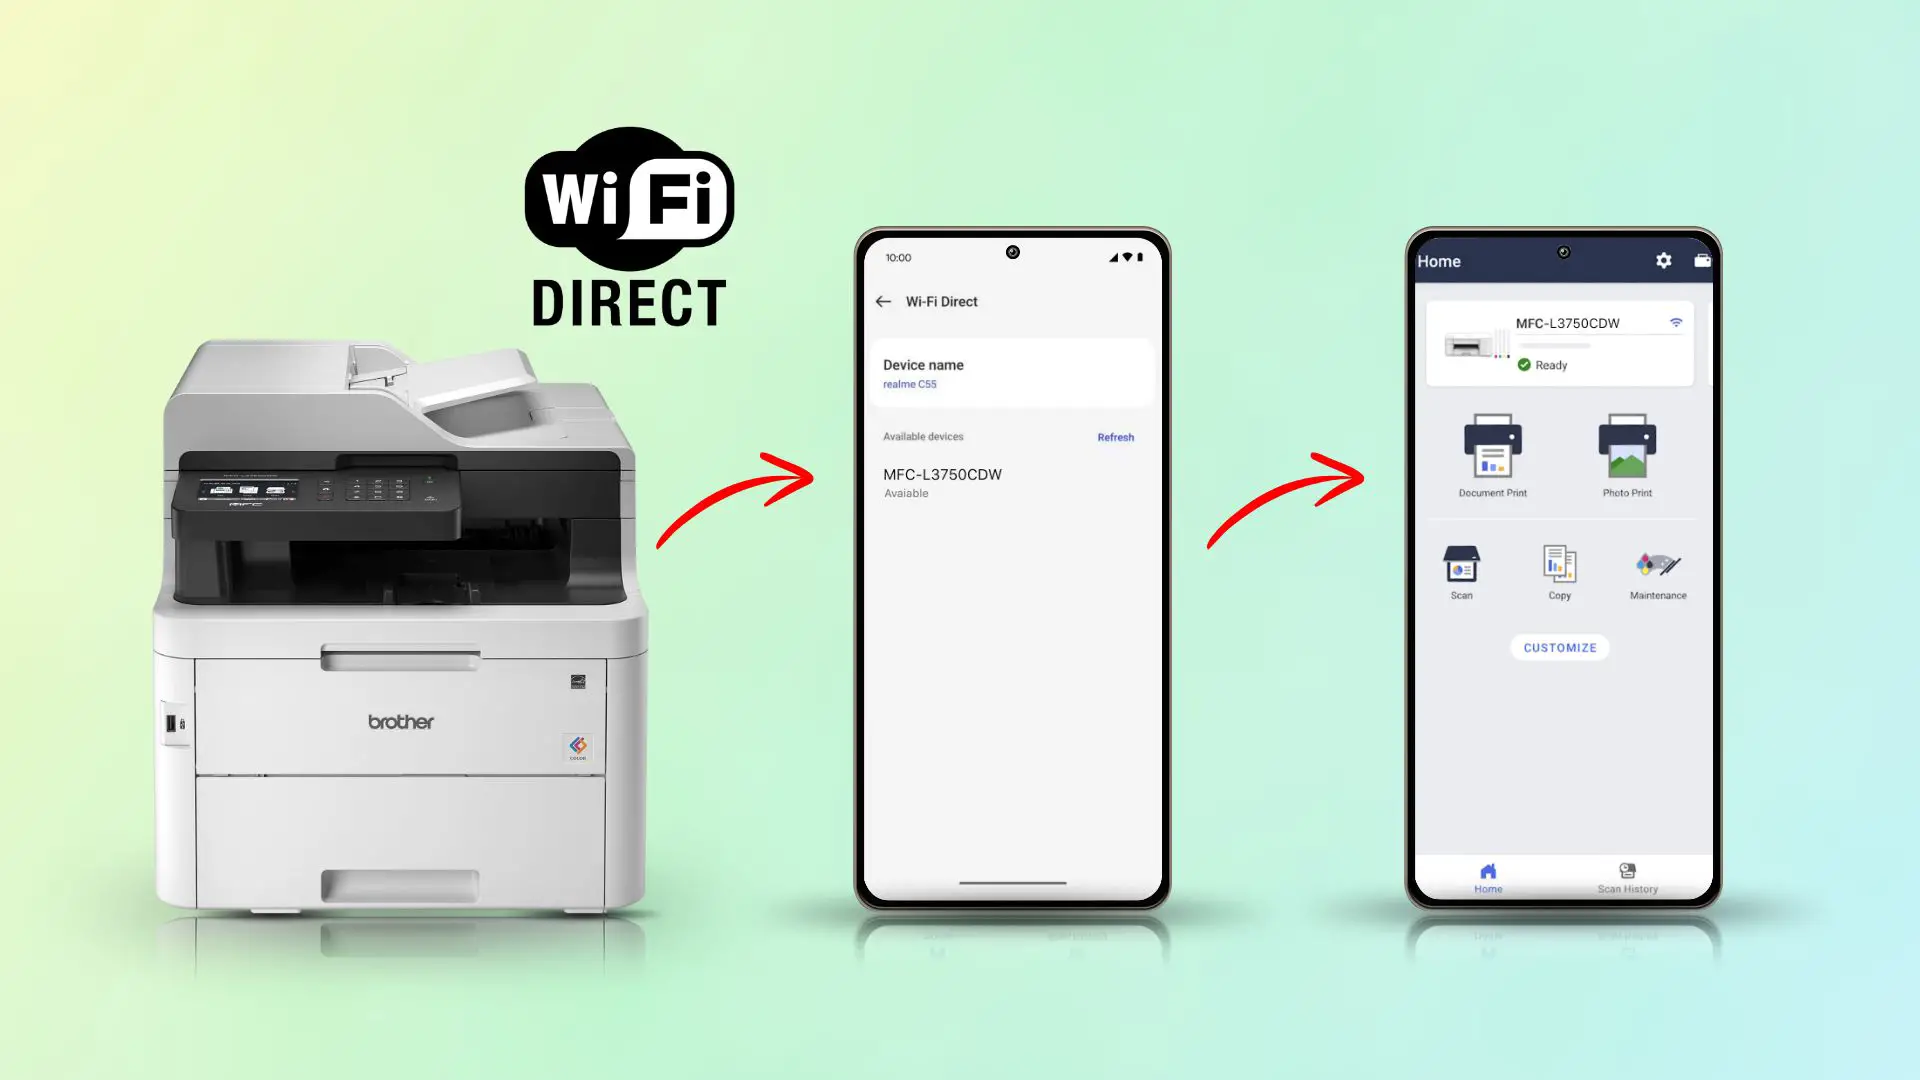 connecting the Brother printer to an Android phone via Wi-Fi Direct